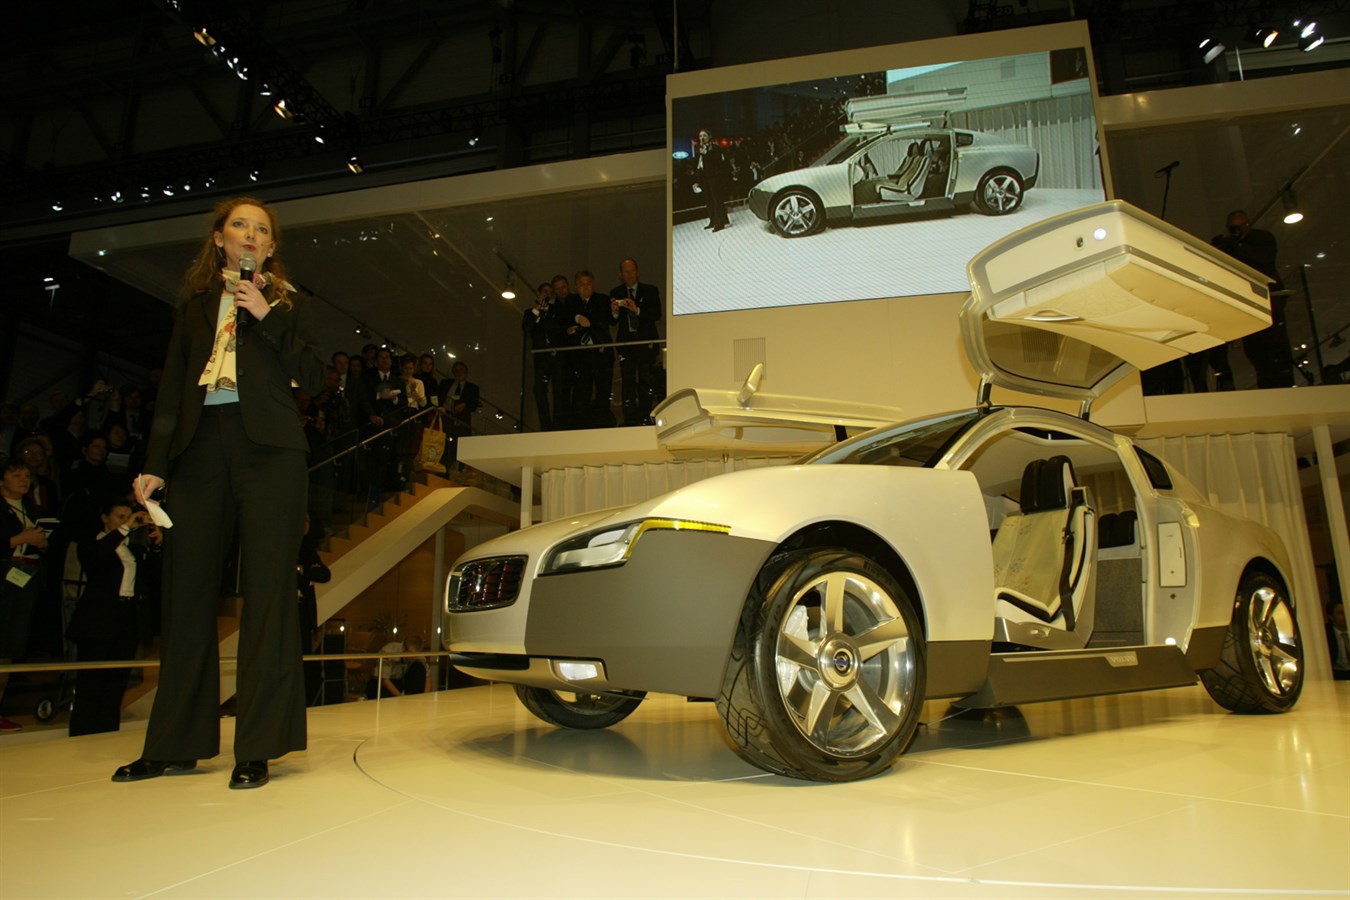 Volvo launch the new Volvo YCC concept car at the Geneva Motor Show, designed by an all female team.